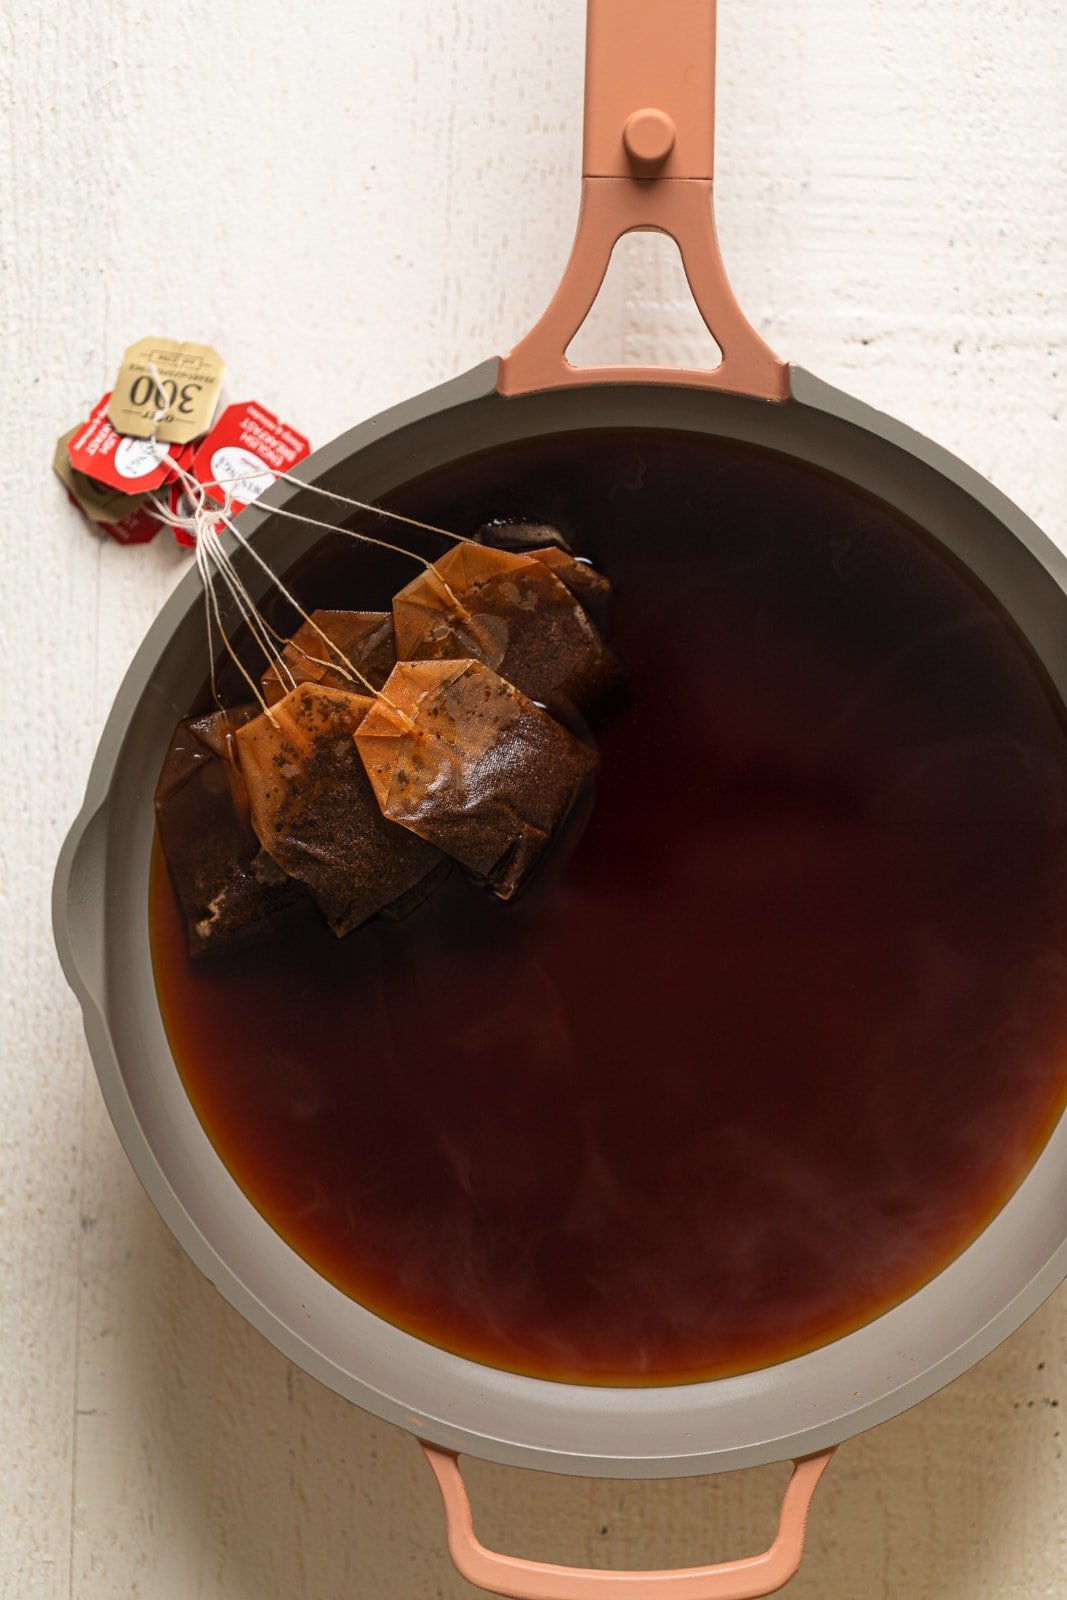 Tea bags steeping in a pot of water